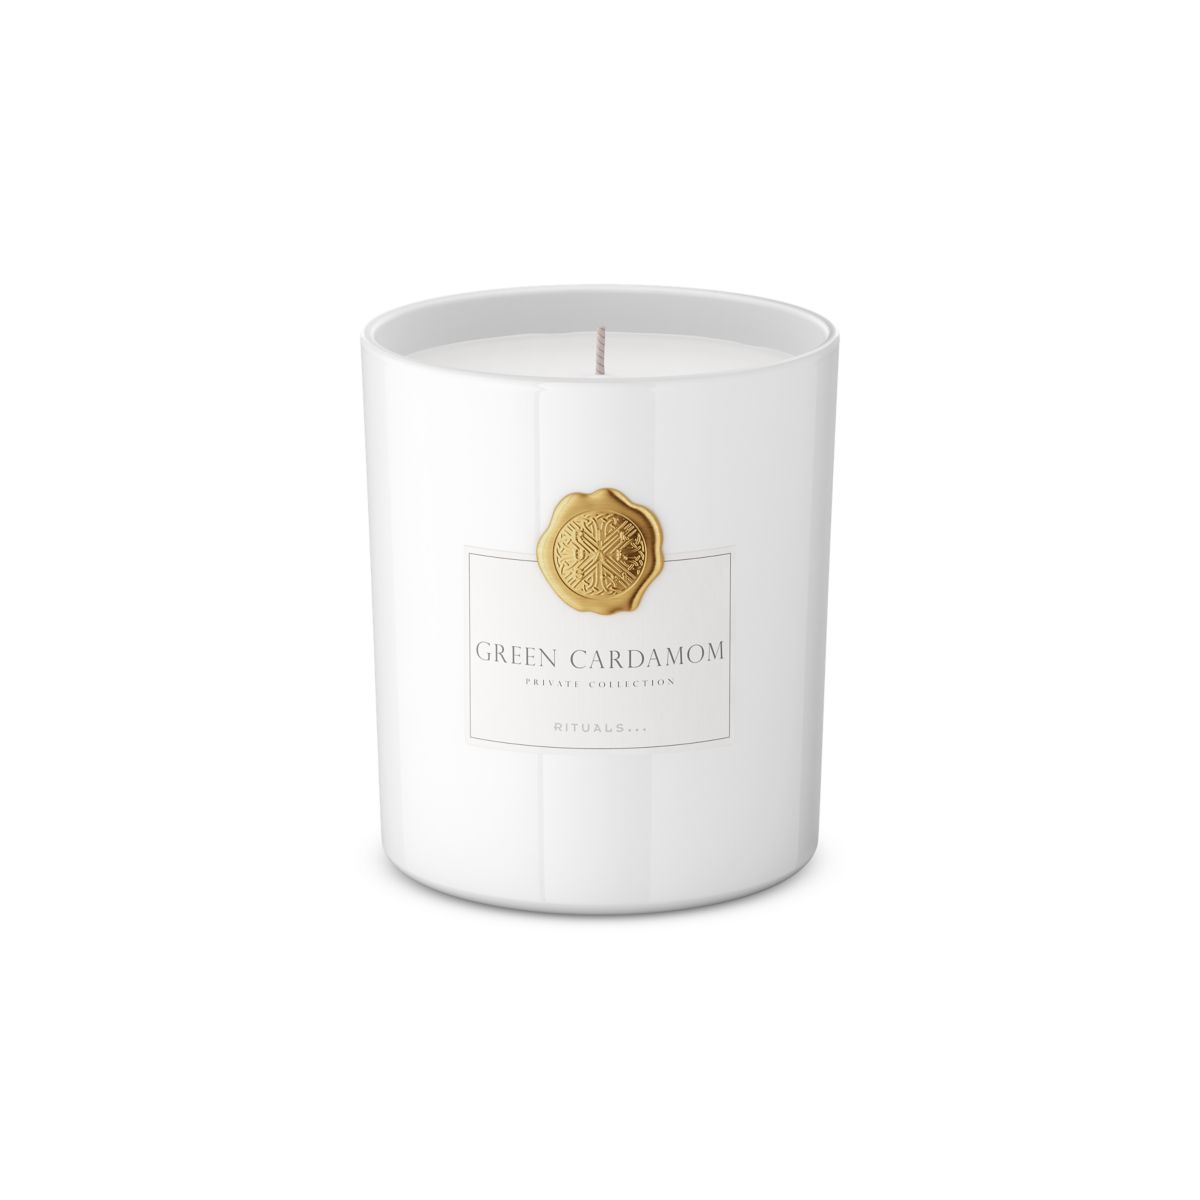 Rituals Luxury Scented Candle - Green Cardamom